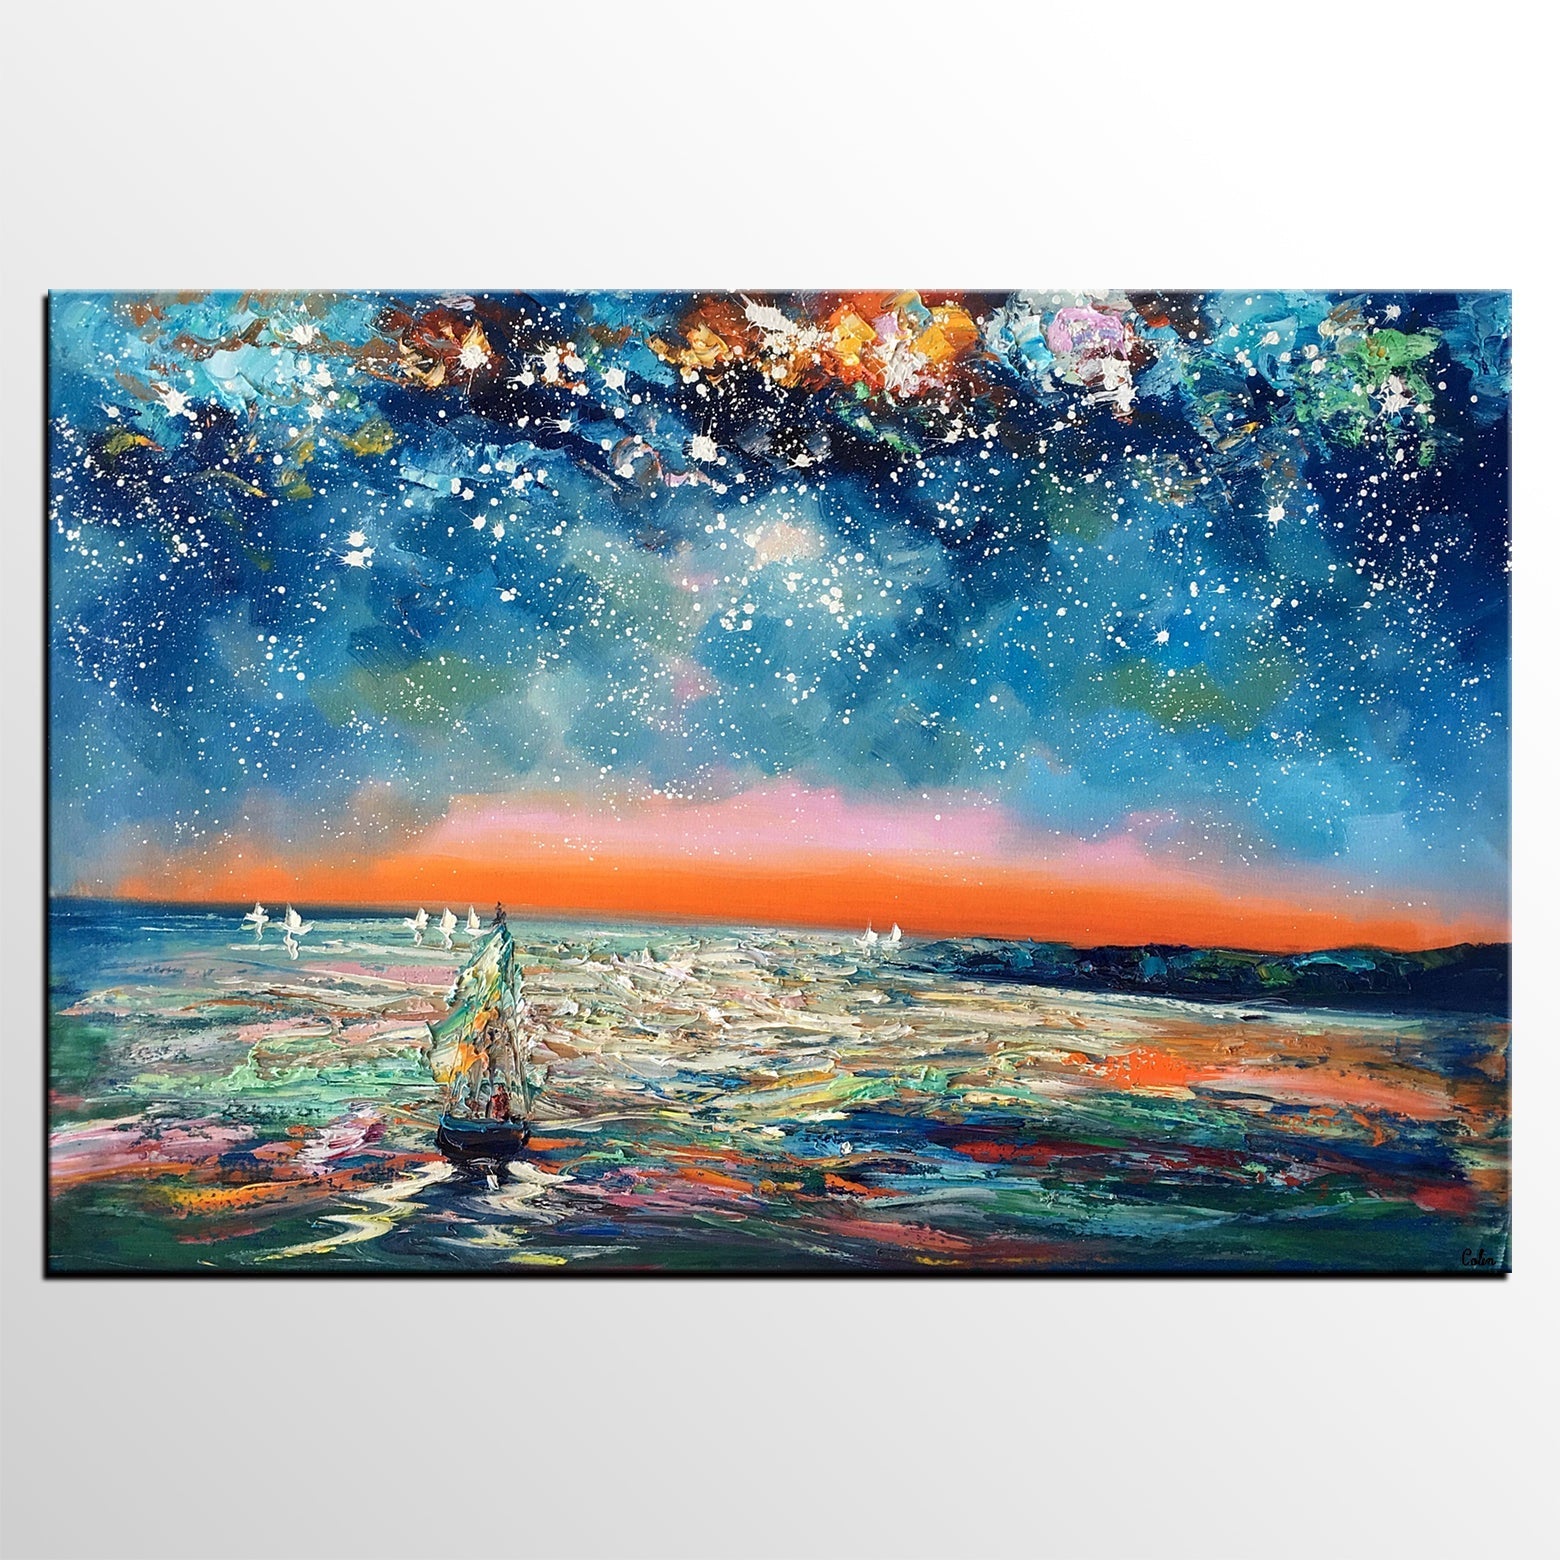 Canvas Painting Landscape, Oil Painting on Canvas, Sail Boat under Starry Night Sky Painting, Custom Art, Landscape Painting for Living Room-Art Painting Canvas